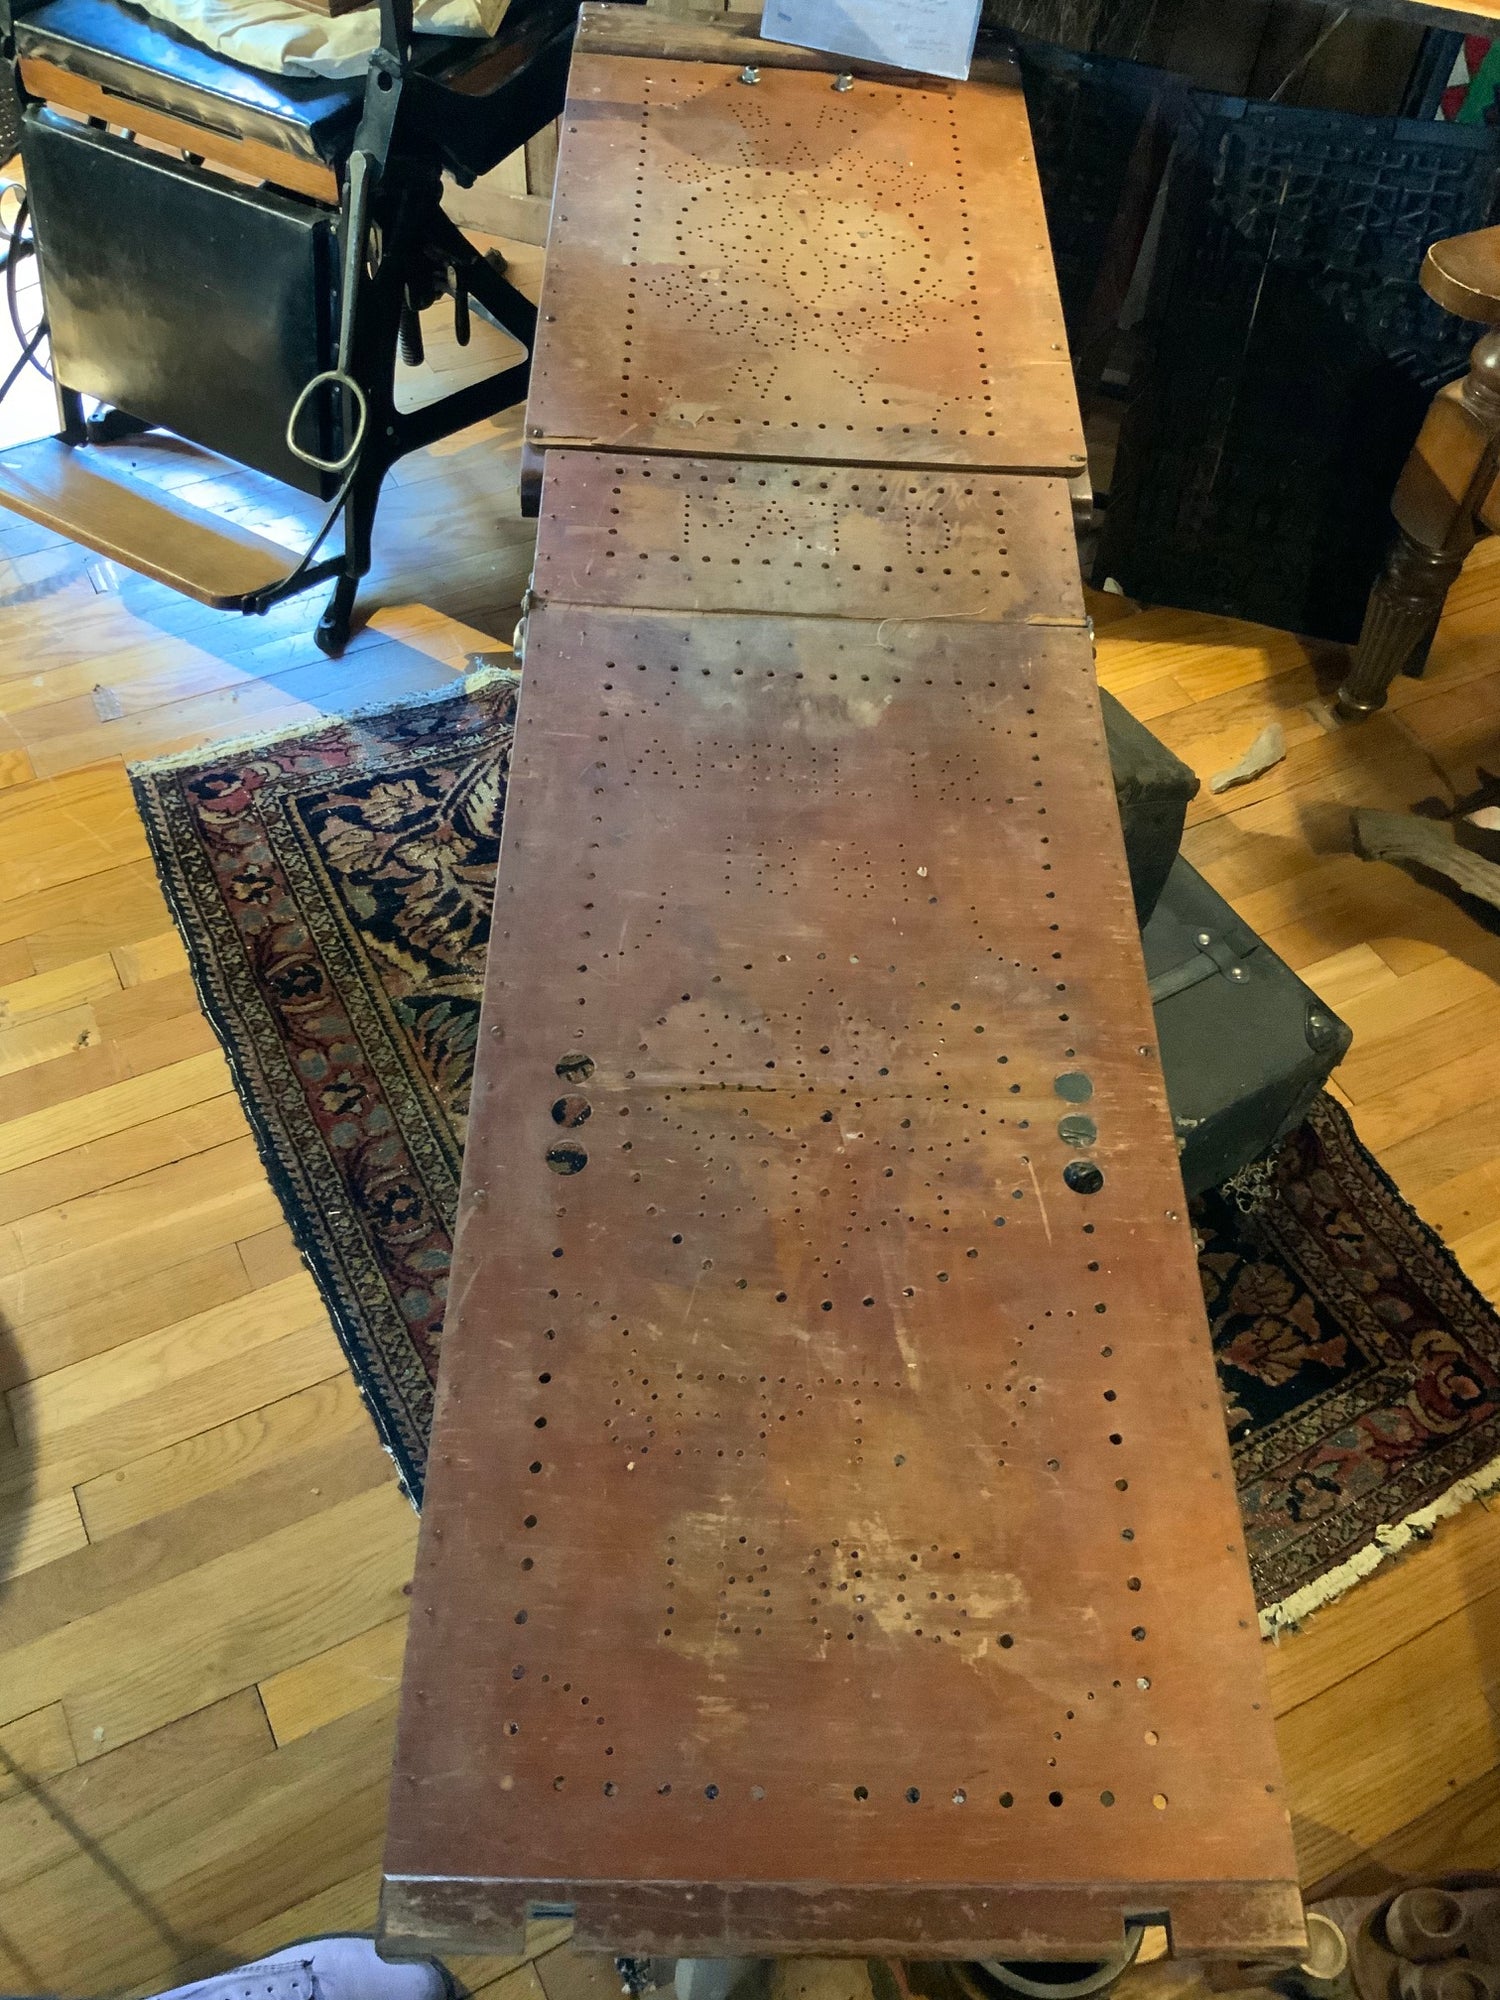 1800s embalming table featured on American Pickers season 4 – Neatoville